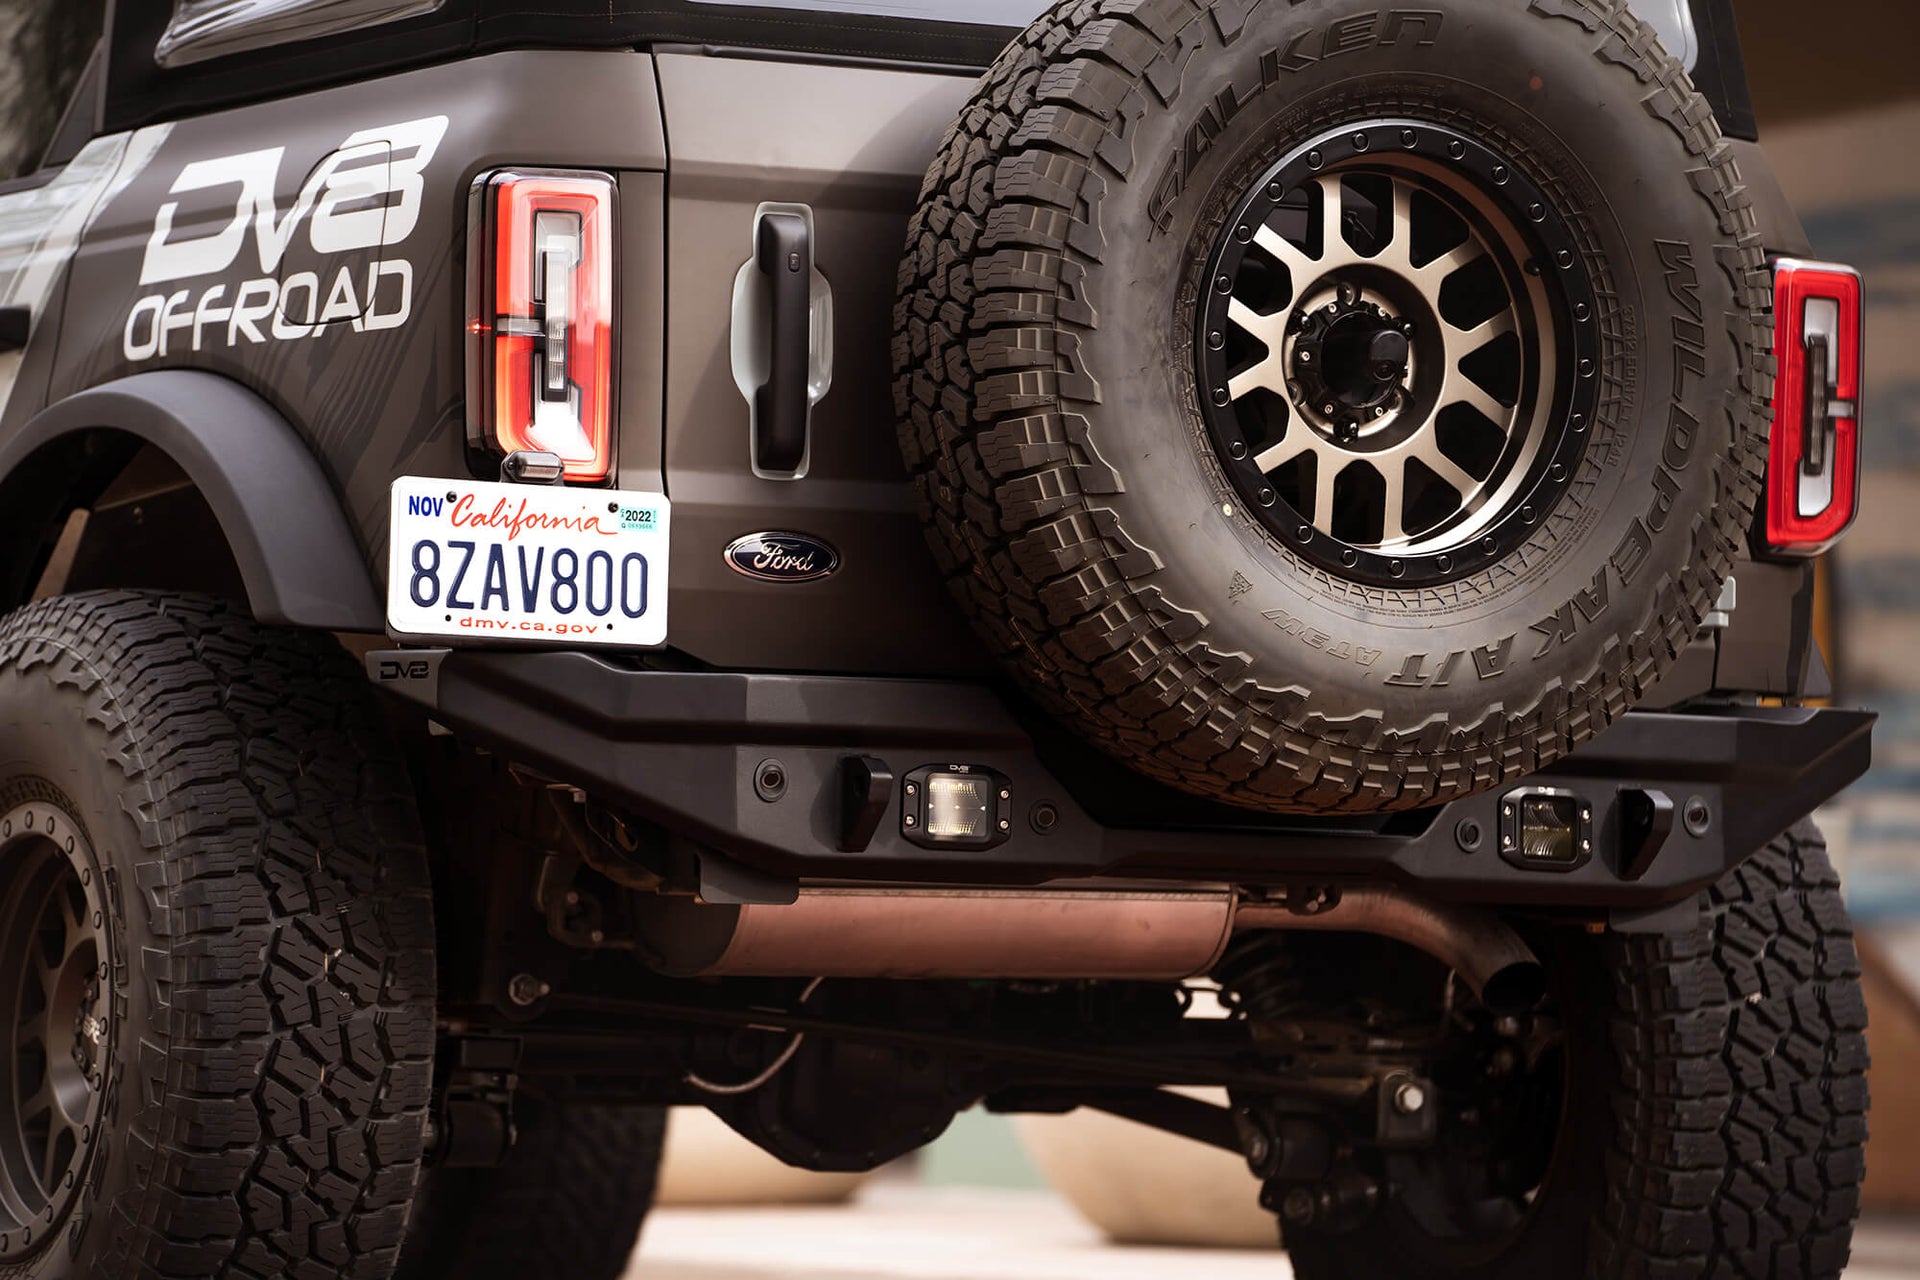 Bronco Rear Bumper with License Plate Mount